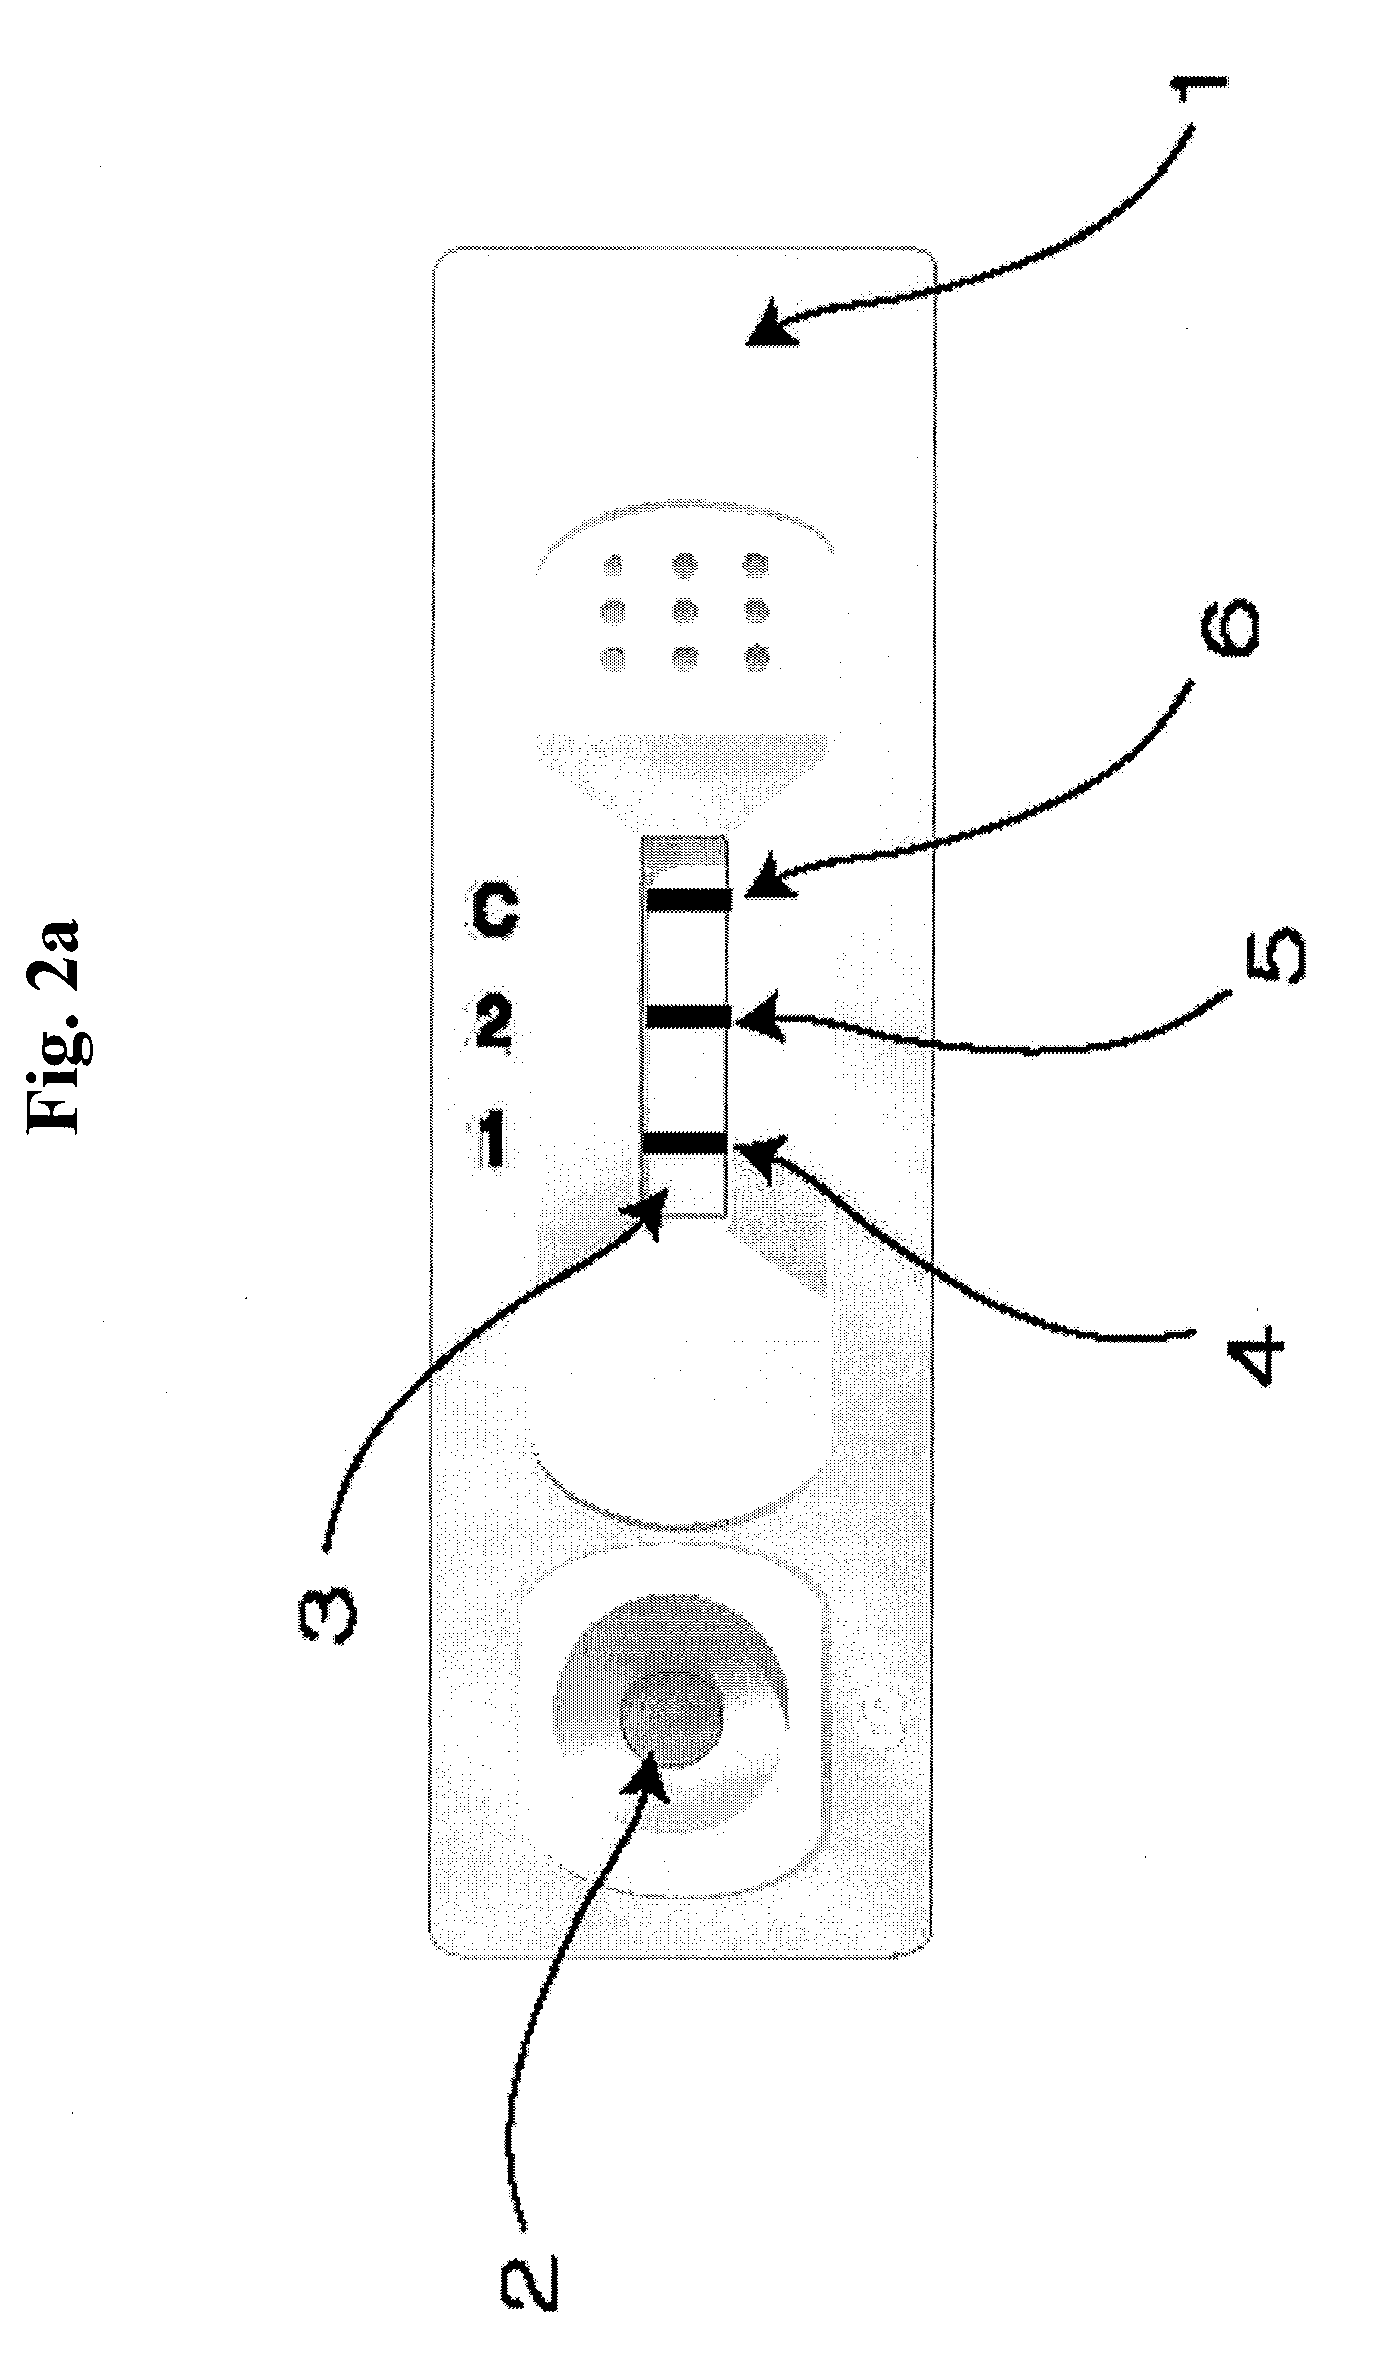 Diagnose device for measuring the ratio of proteins with similar structure